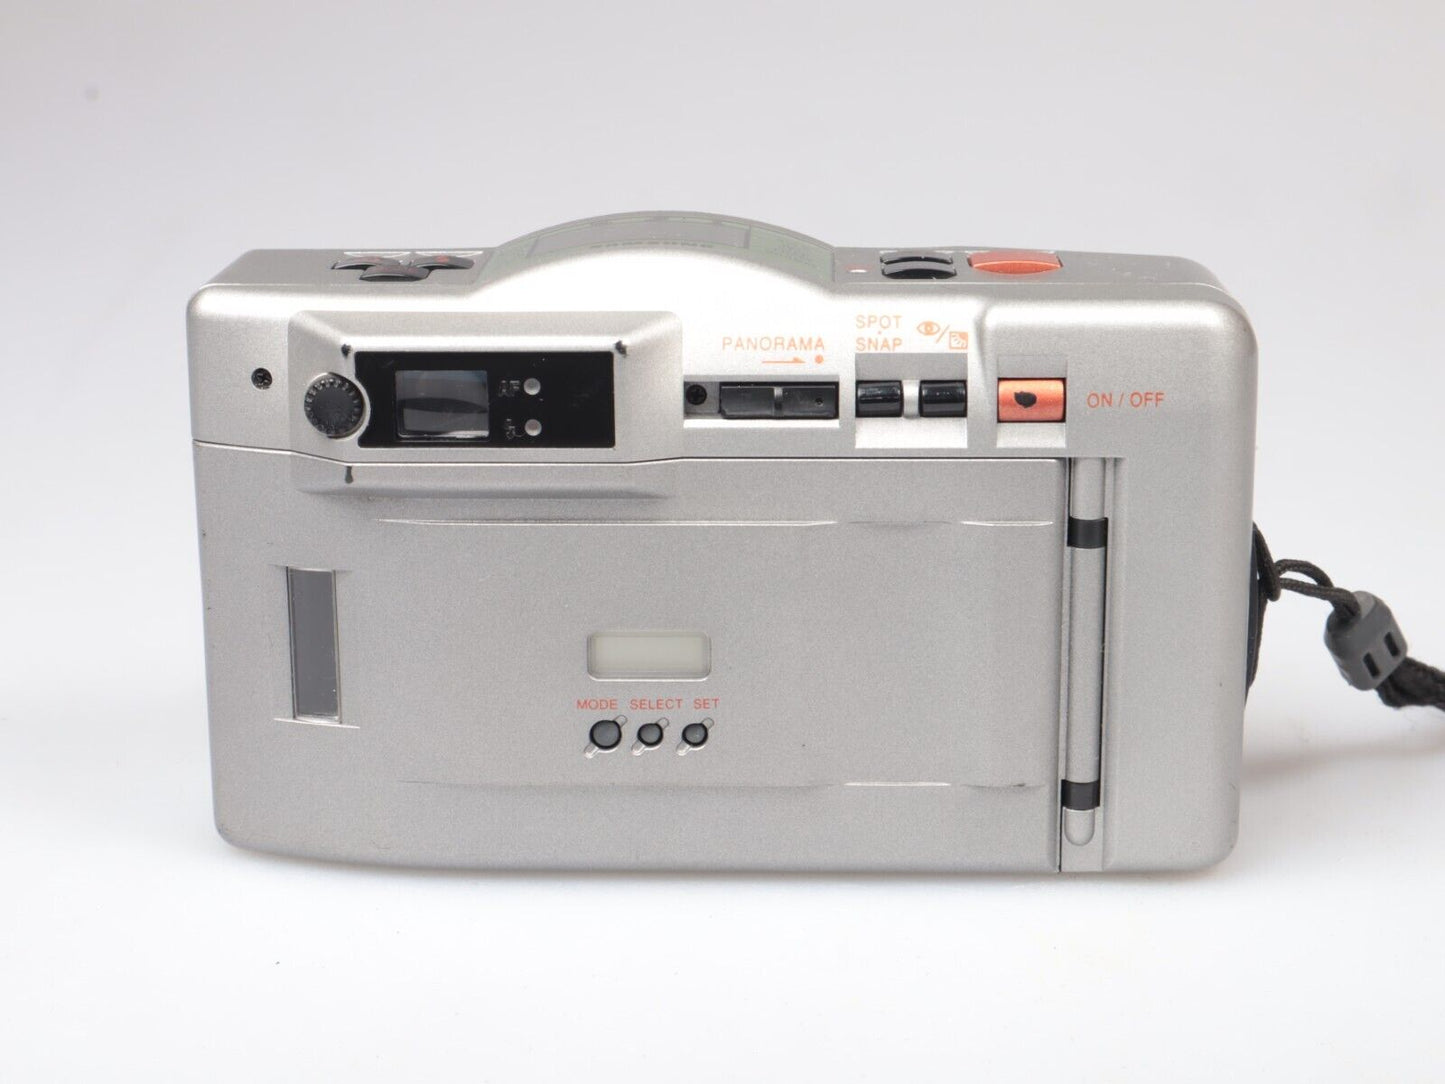 Samsung ECX2 Panorama | 35mm Point and shoot Film Camera | Silver